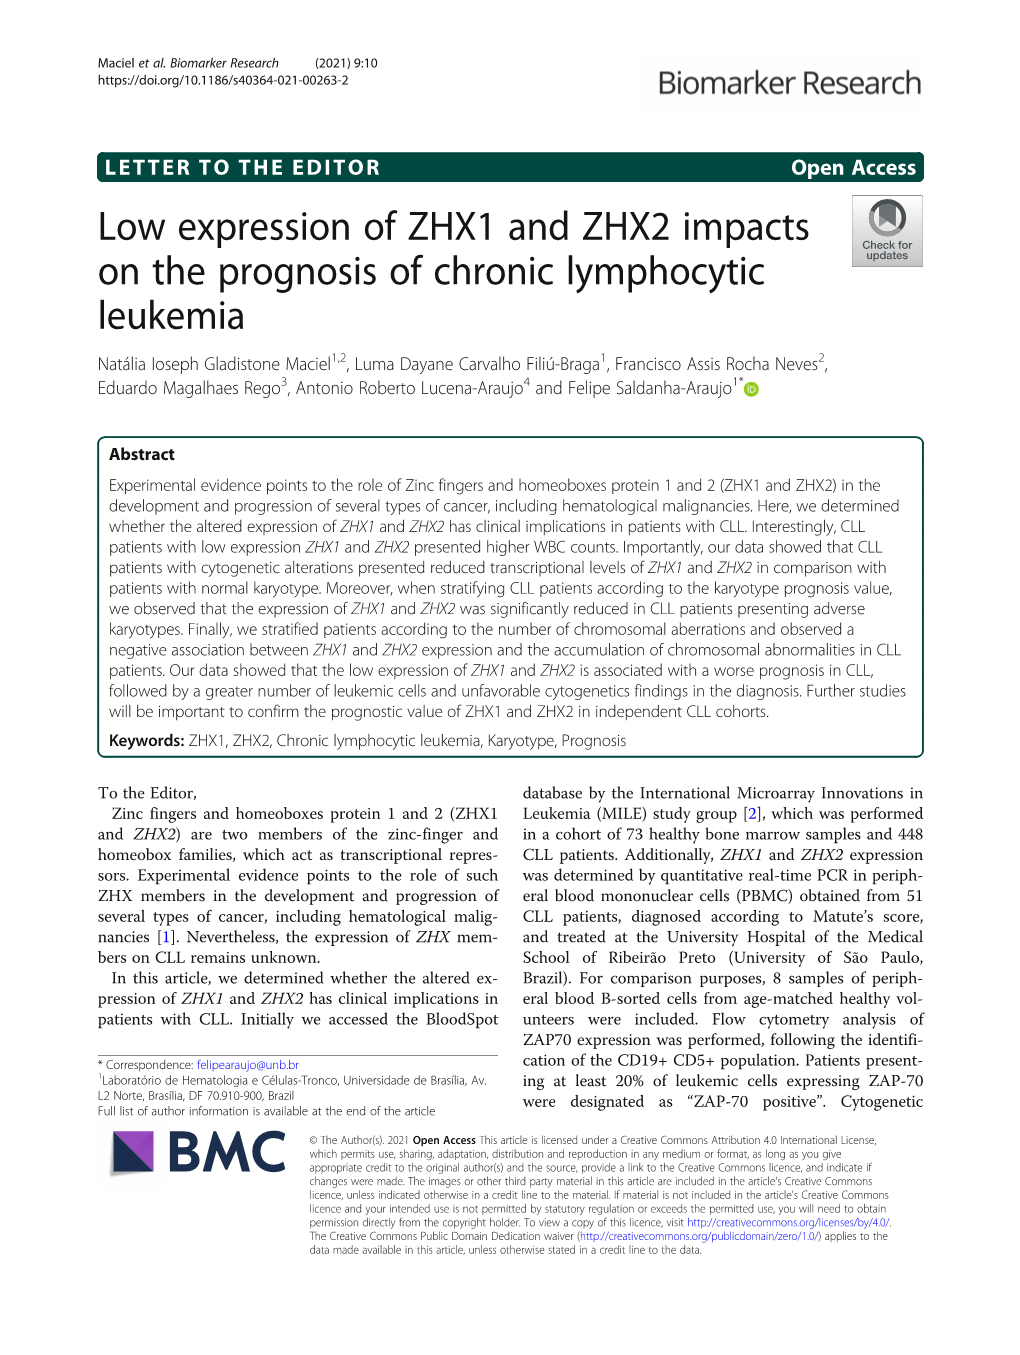 Low Expression of ZHX1 and ZHX2 Impacts on the Prognosis of Chronic